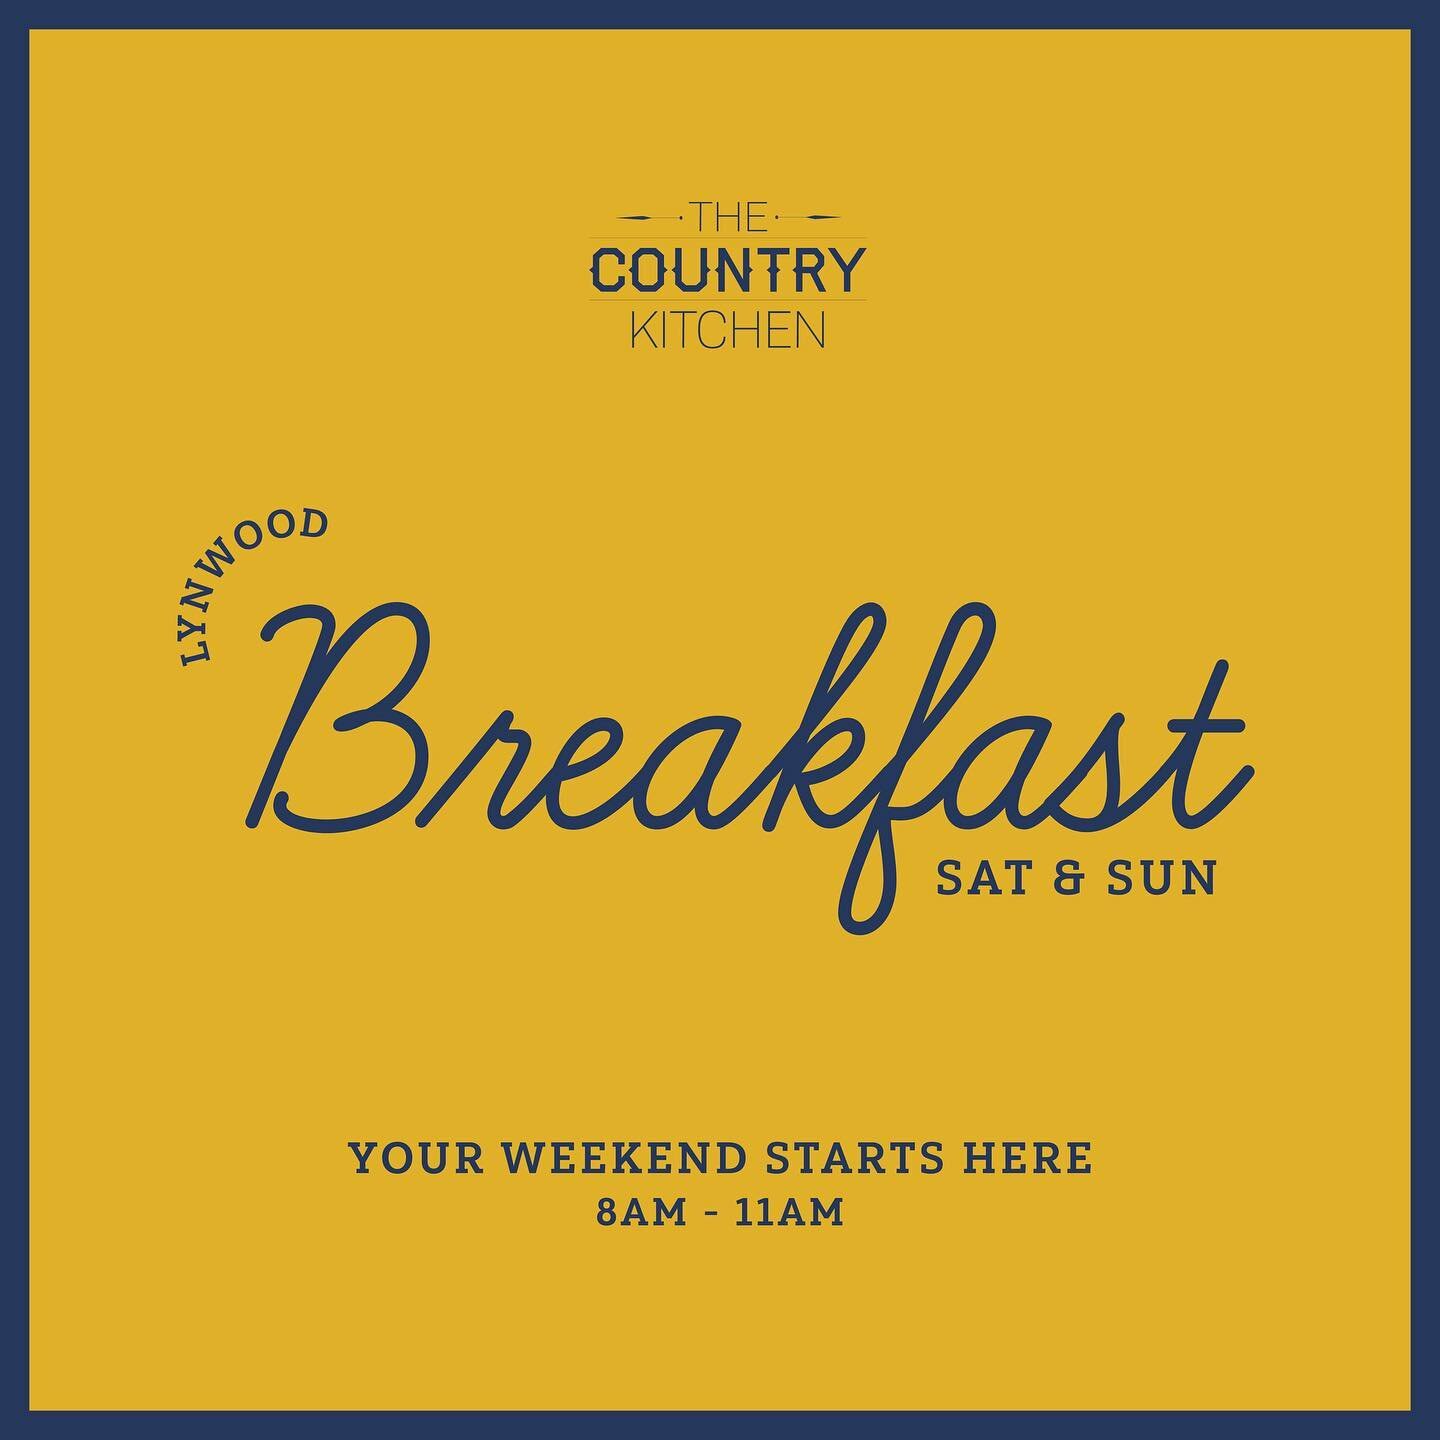 Breakfast 🍳 is now available every weekend @lynwoodcountryclub.syd a must try 😋 #breakfast #weekend #family #friends #weekendvibes 
www.cateringhq.com.au 
www.stevesidd.com